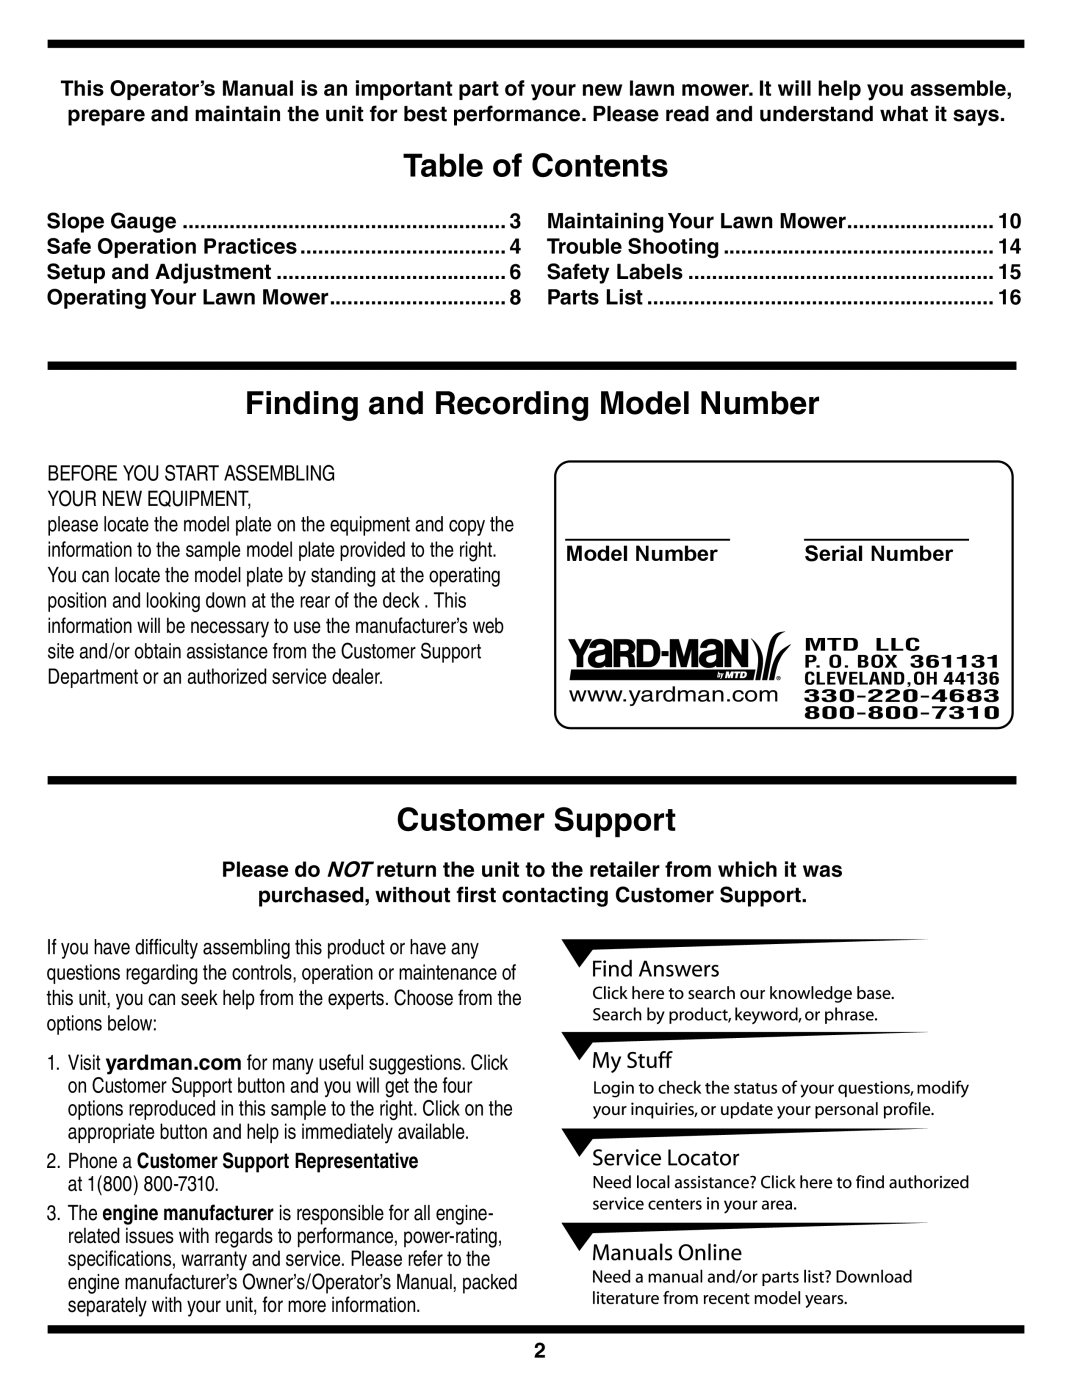 Yard-Man 829 warranty Table of Contents, Finding and Recording Model Number, Customer Support, Serial Number 